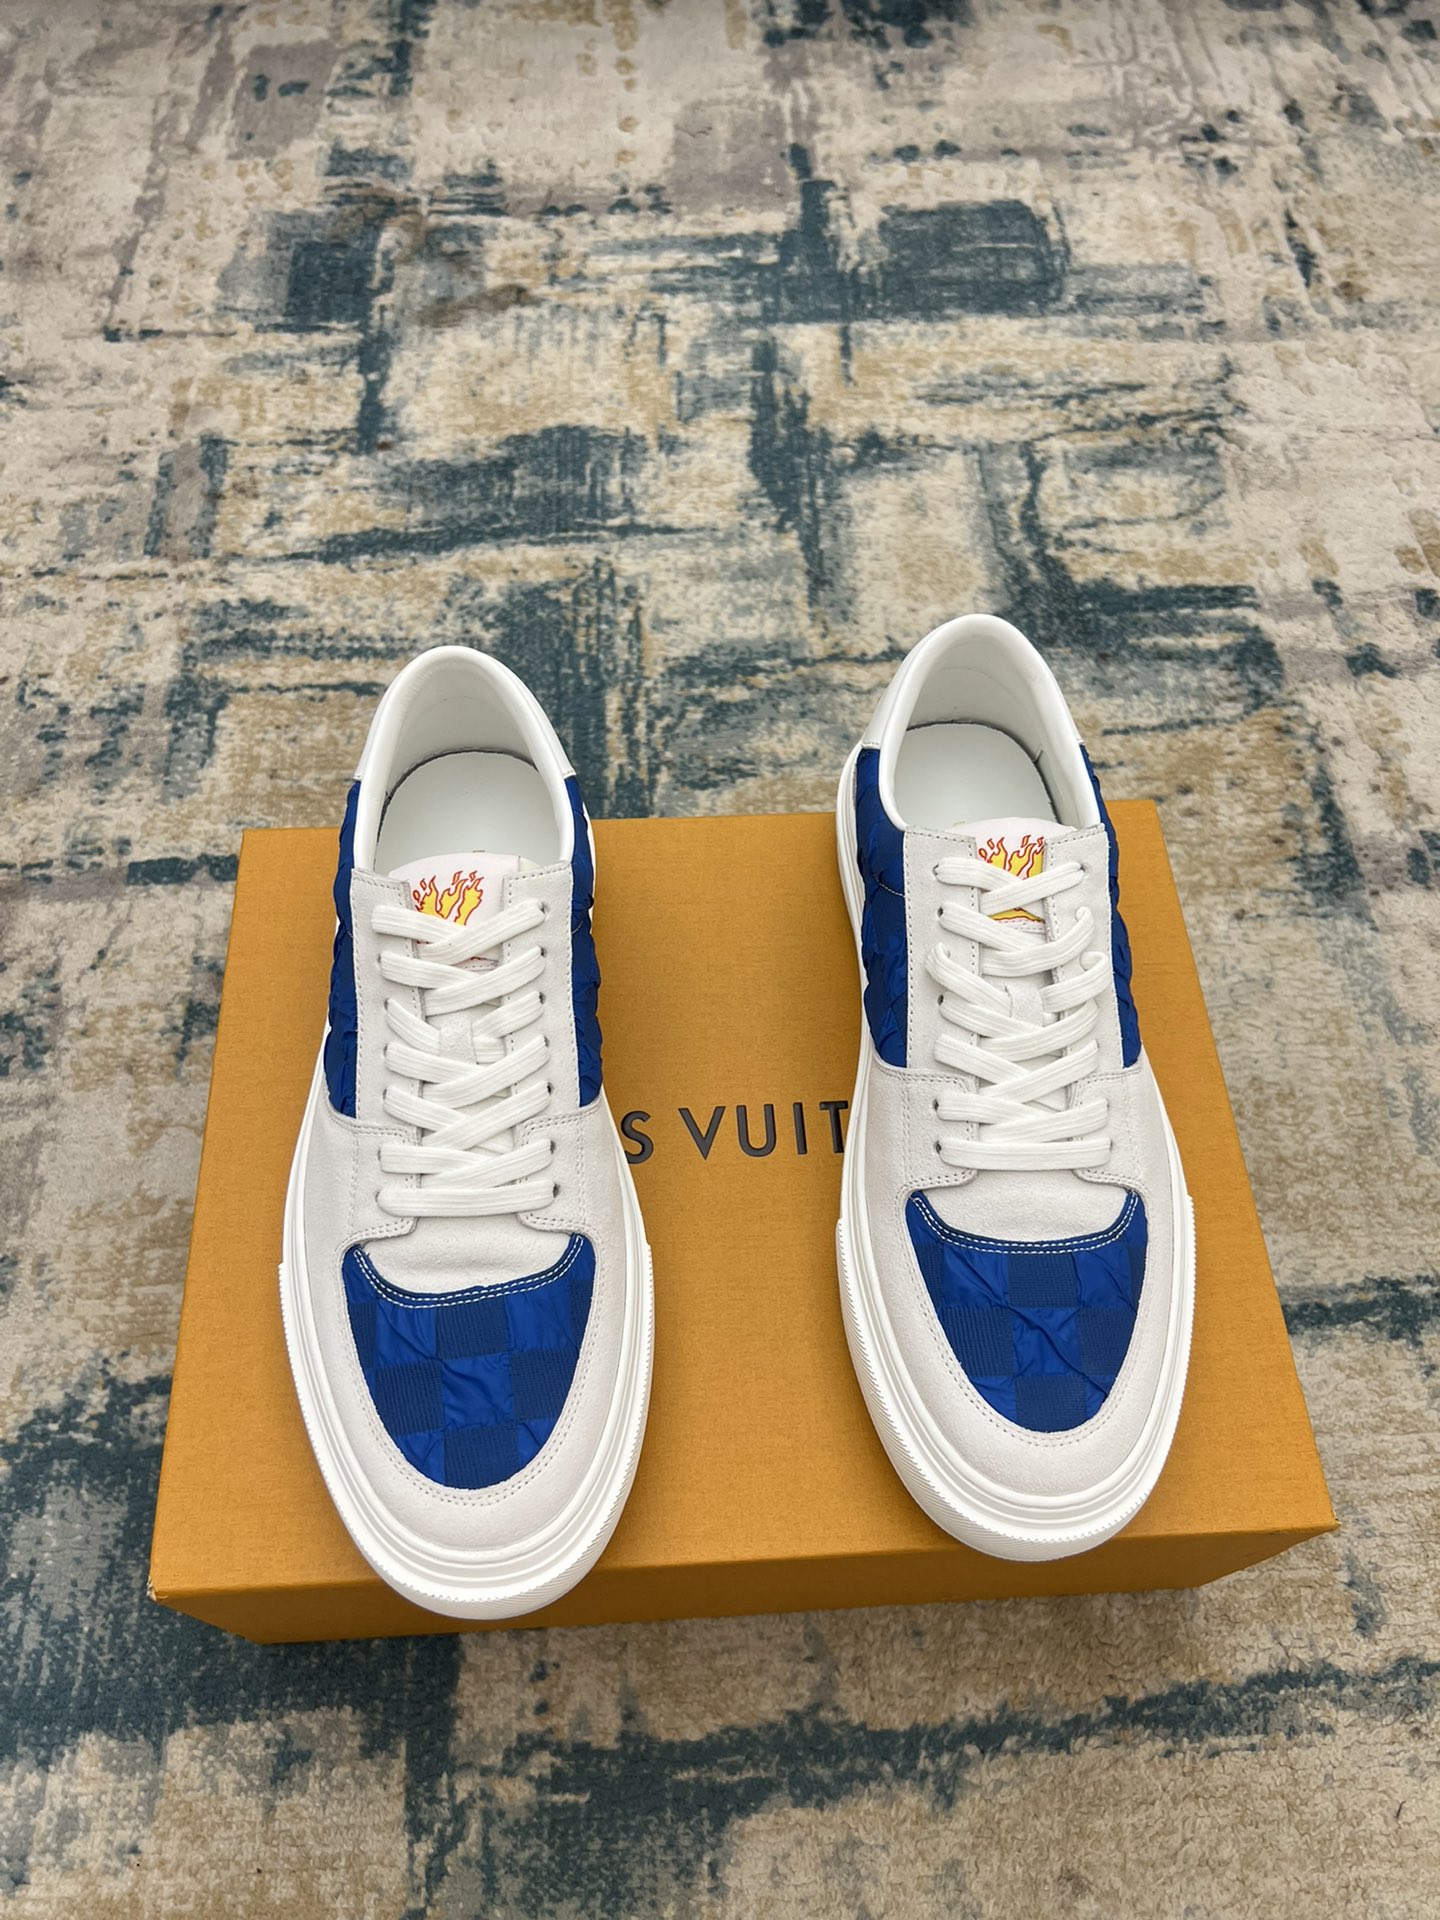 Louis Vuitton Sneakers Casual Shoes High Quality Designer
 Men Cowhide Rubber Casual